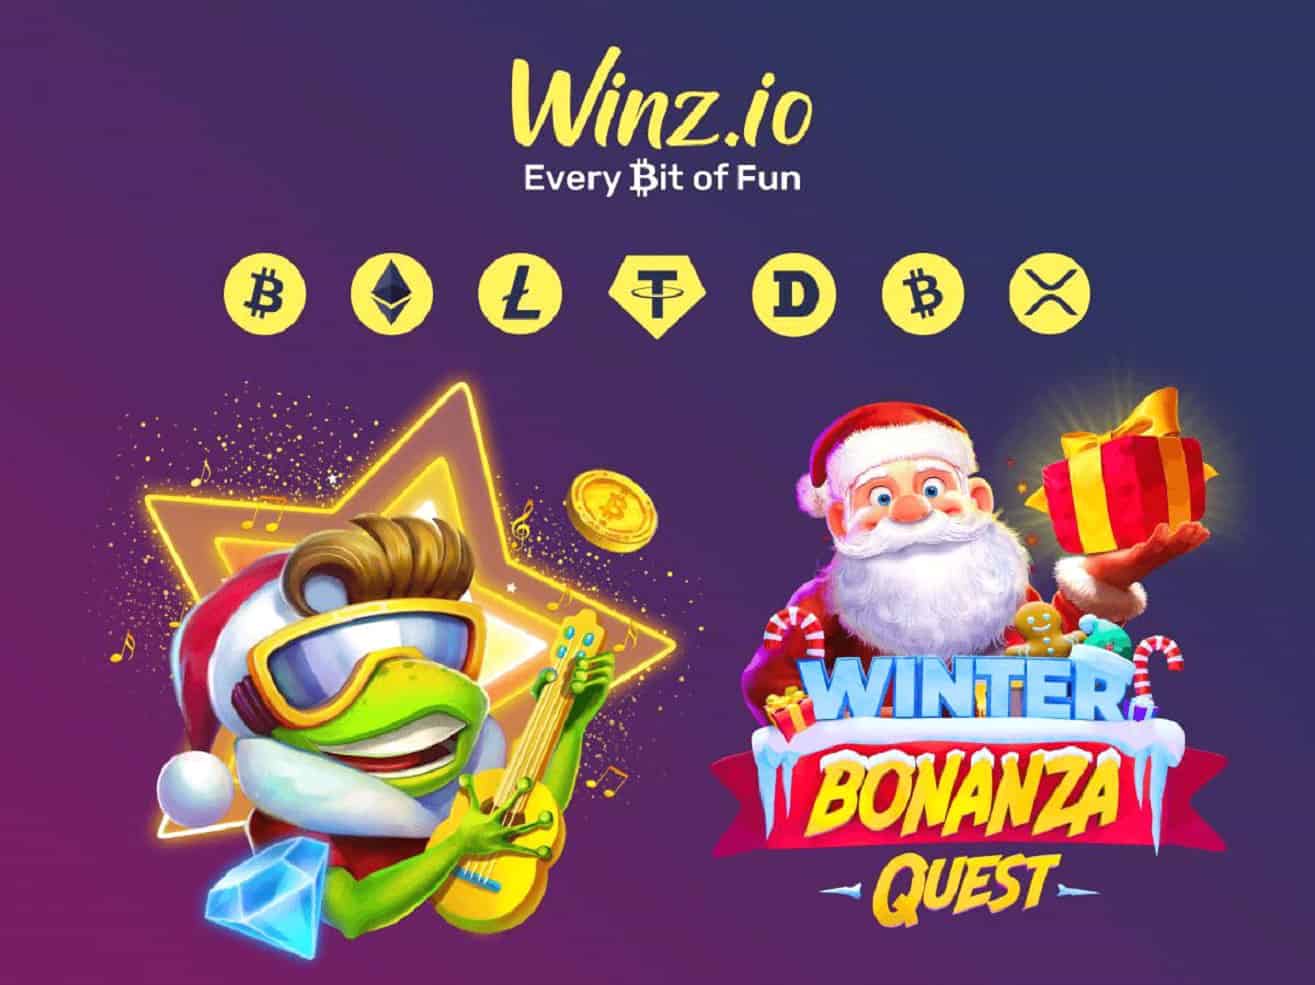 Winzio-revamps-platform-and-launches-two-no-wagering-bonus-events-for-all-players